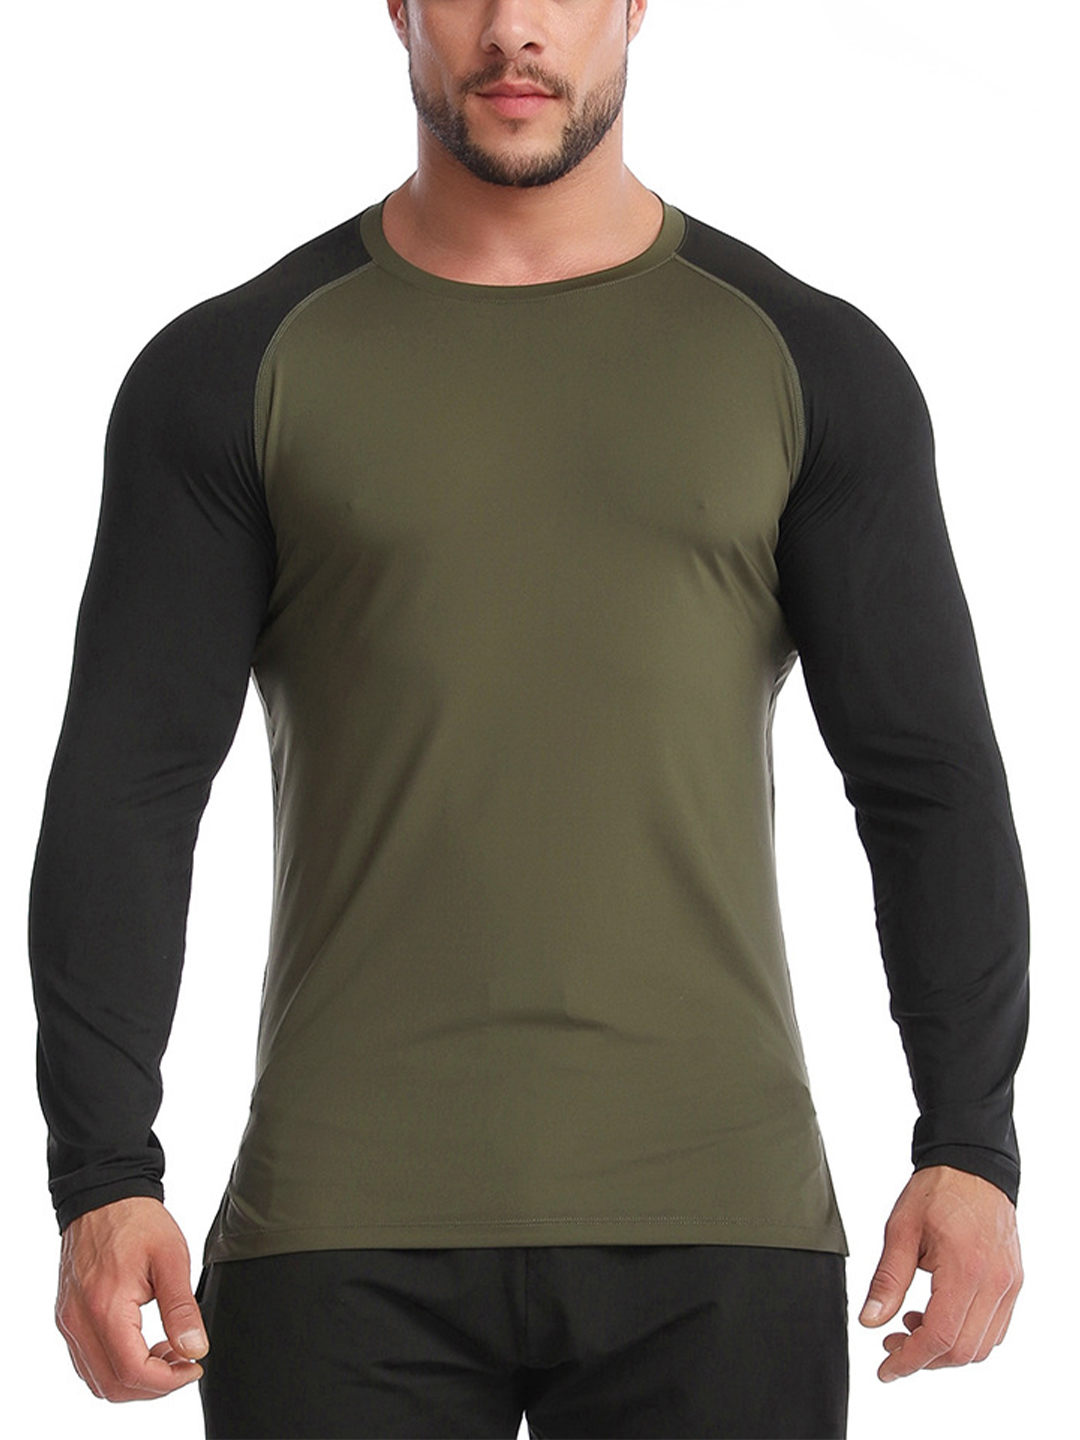 Men's Long Sleeve Contrasting Colours Fitness T-Shirt